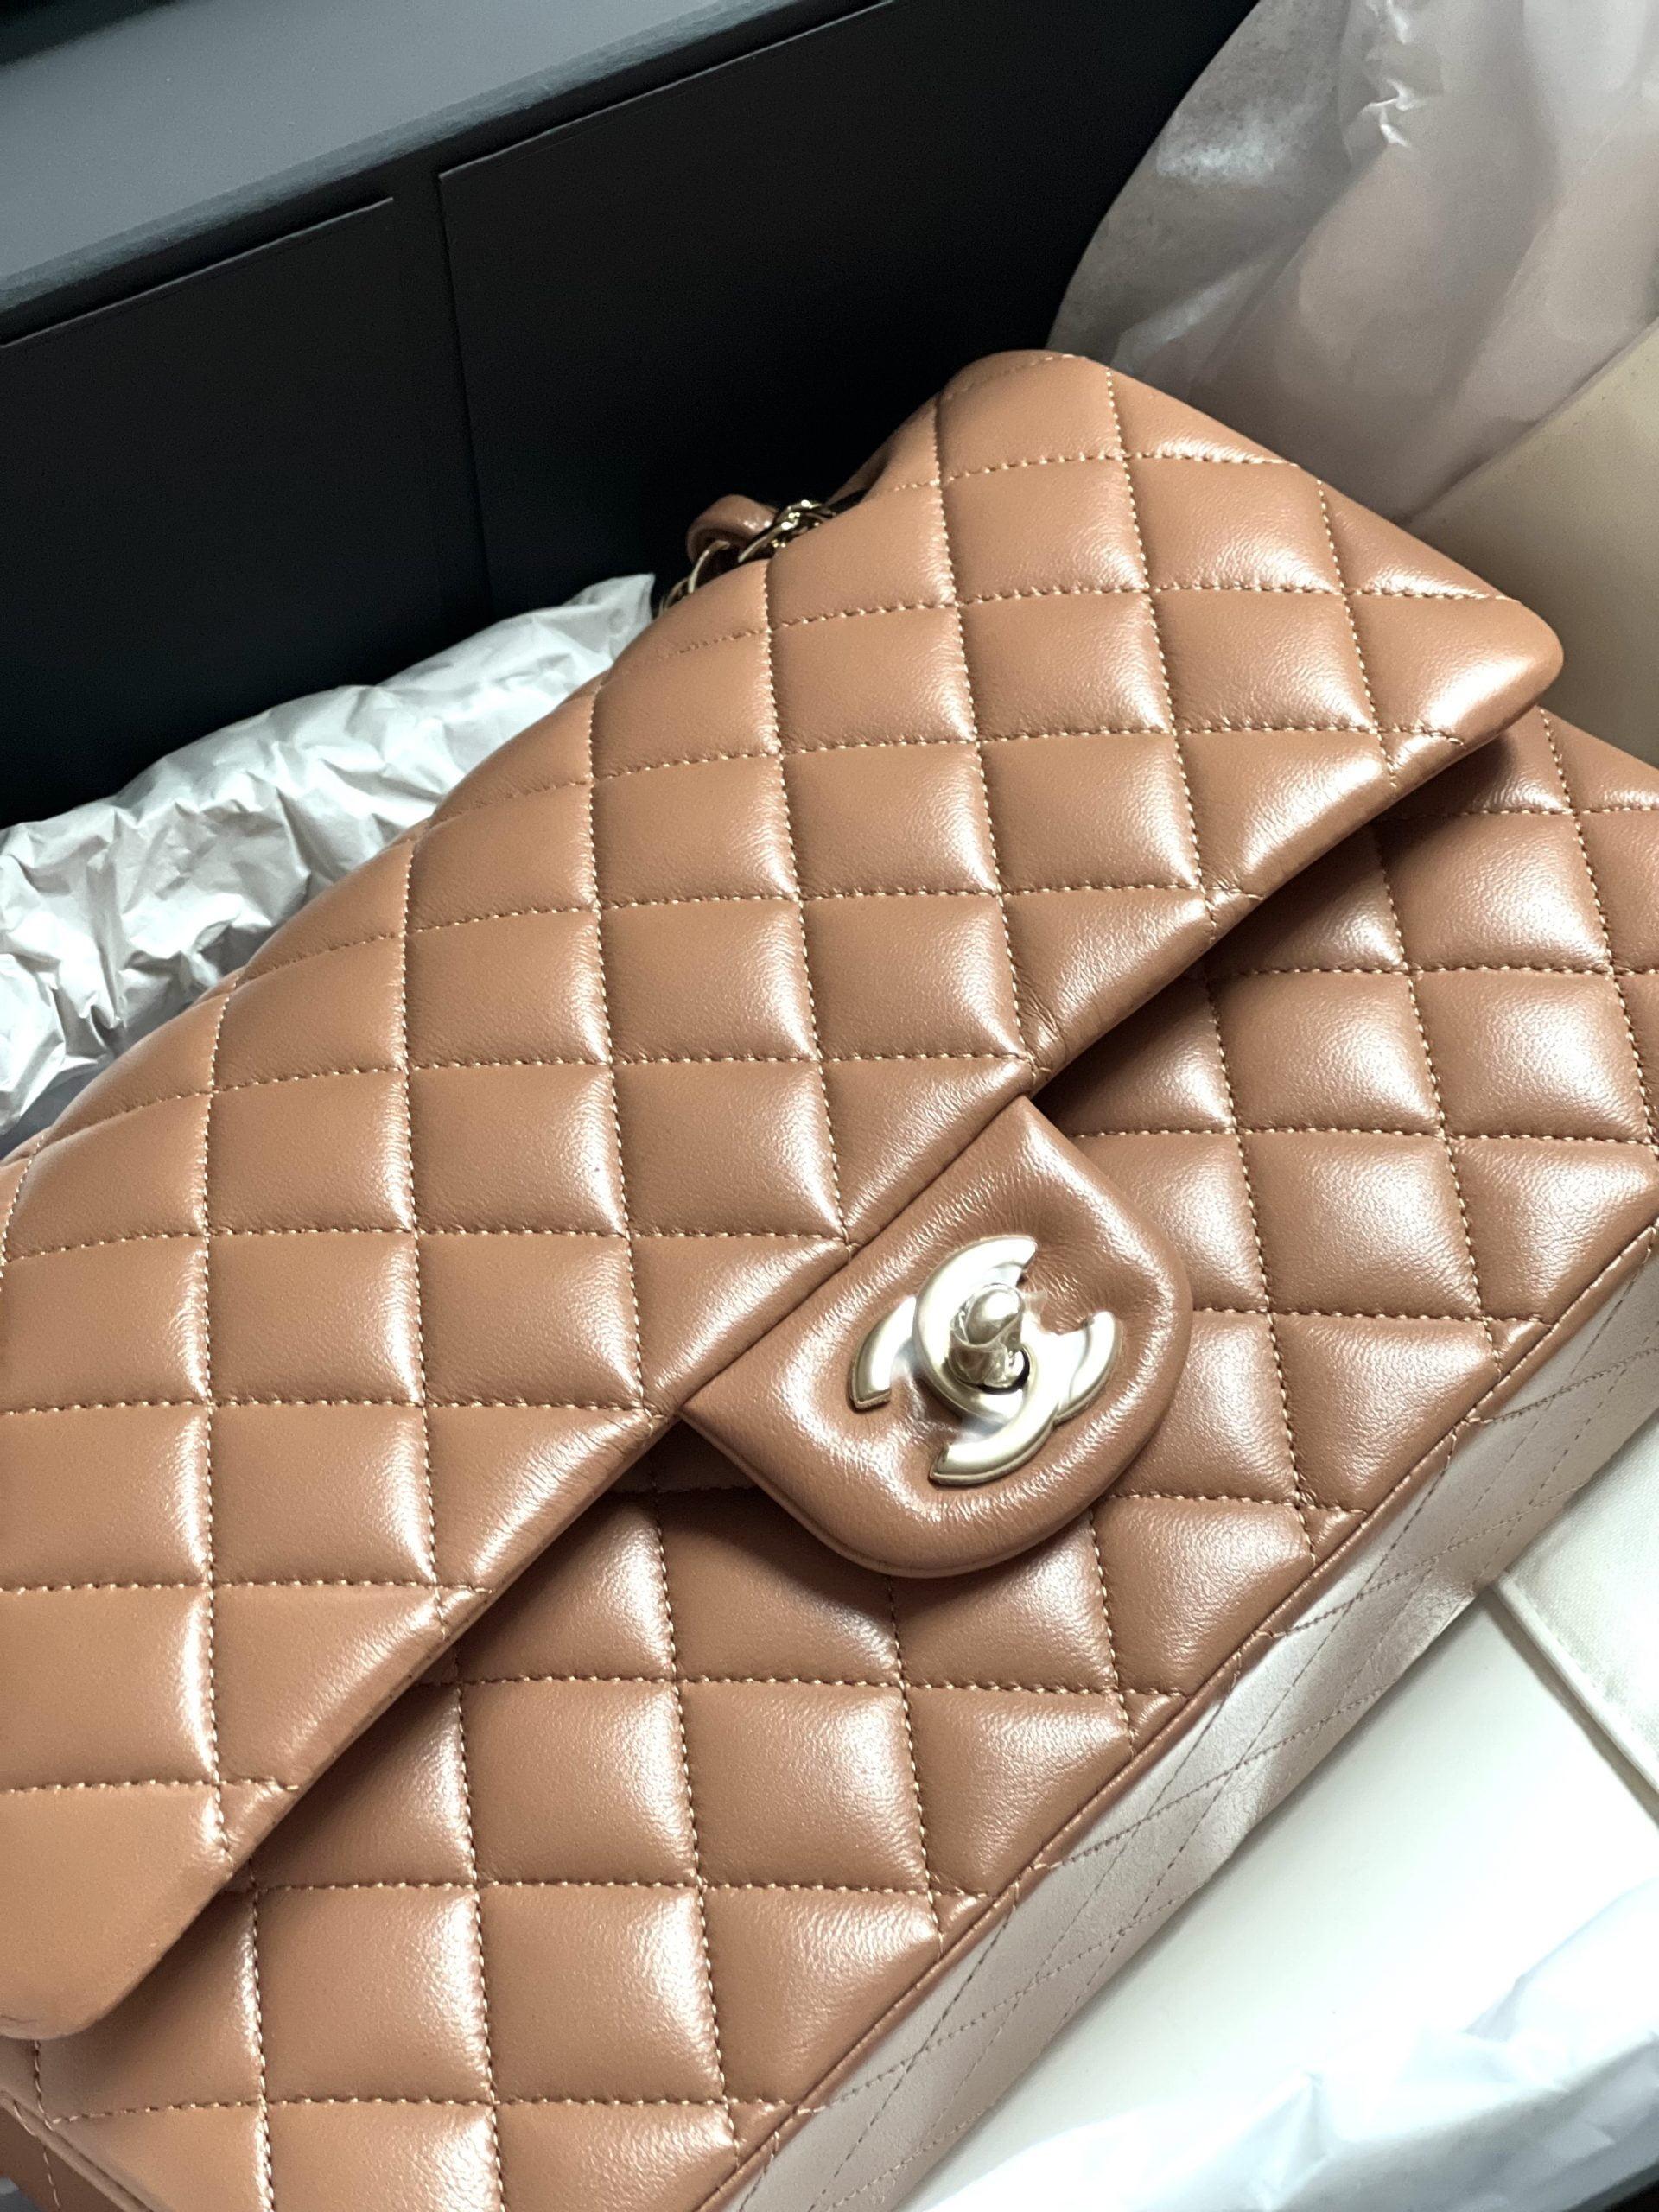 CHANEL 21P CARAMEL - Let's Take a Closer Look at this Highly